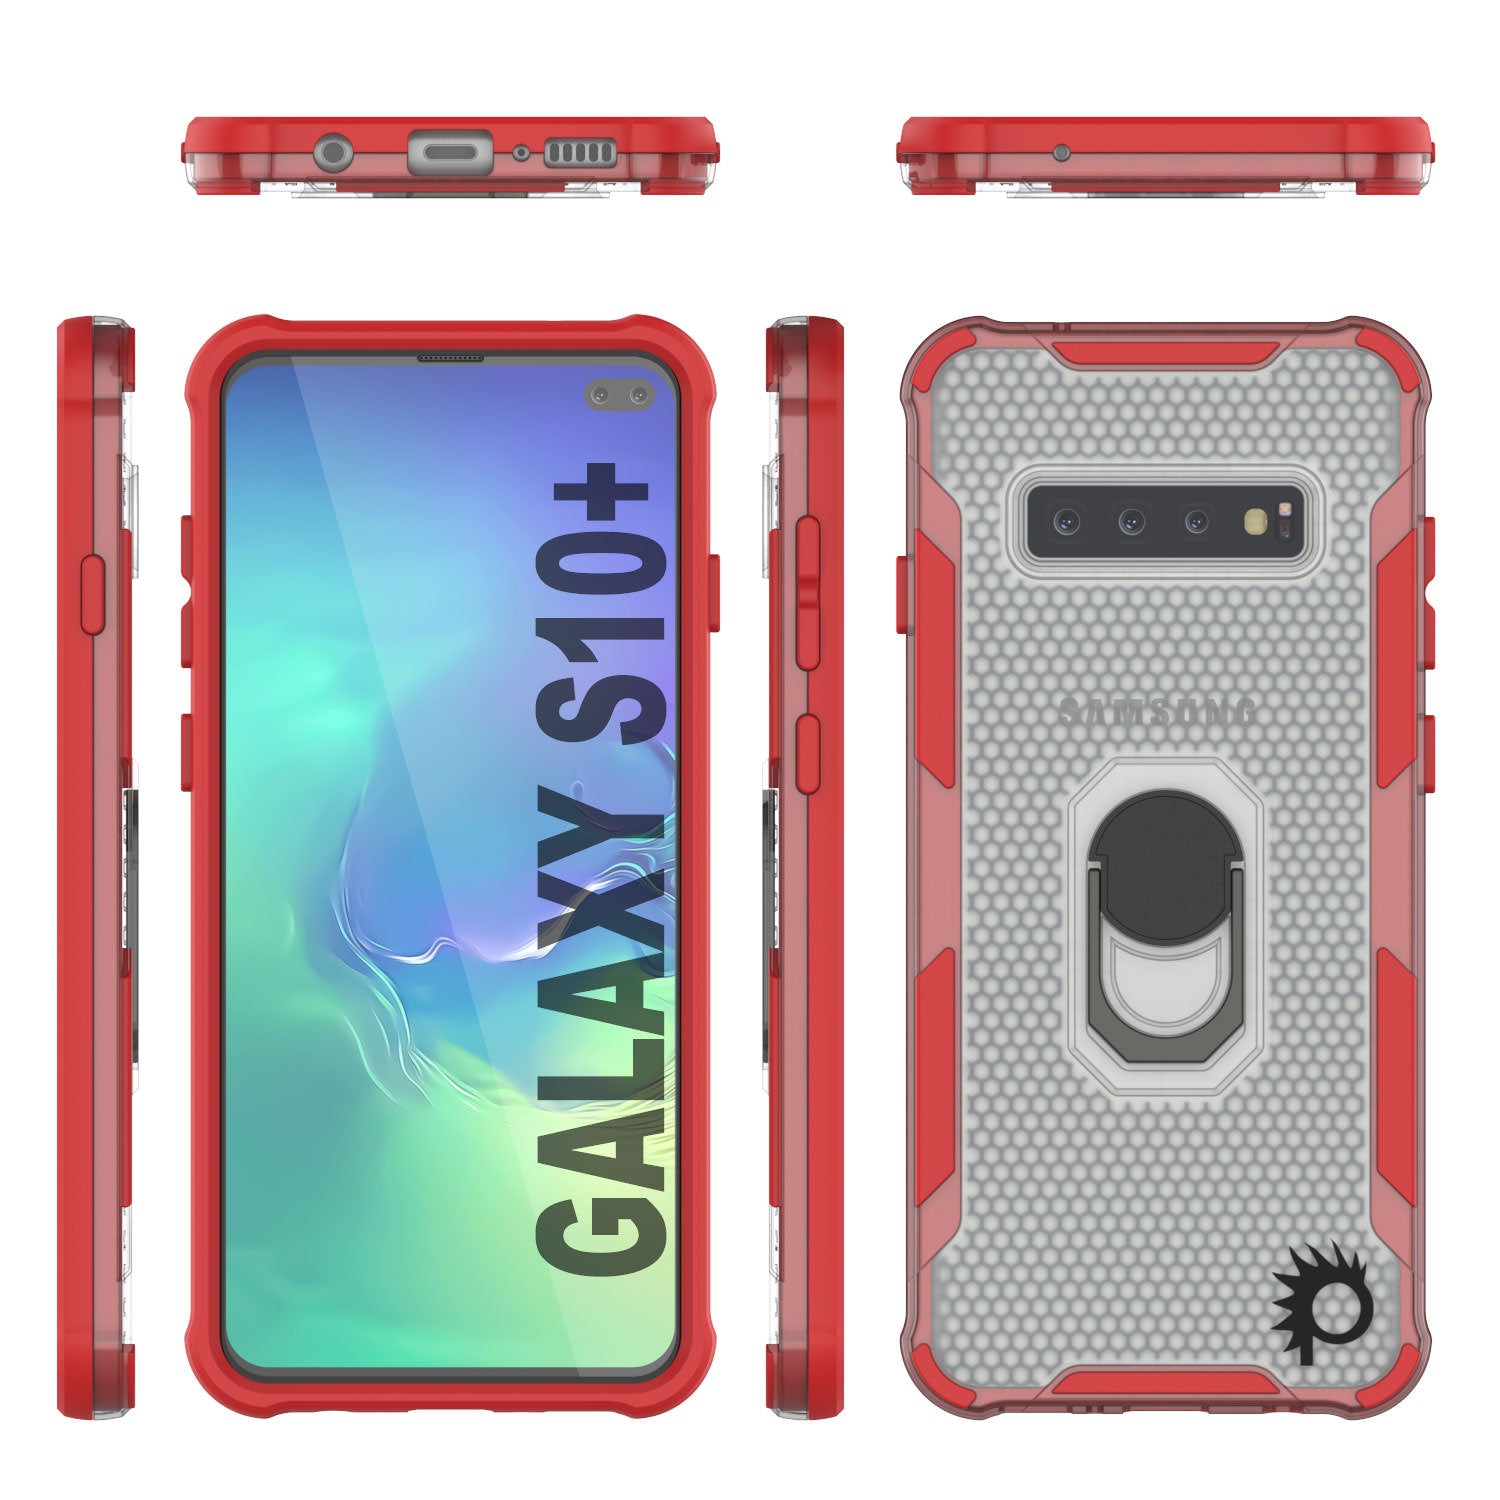 Punkcase Galaxy S10 Plus Case [Magnetix 2.0 Series] Clear Protective TPU Cover W/Kickstand [Red]